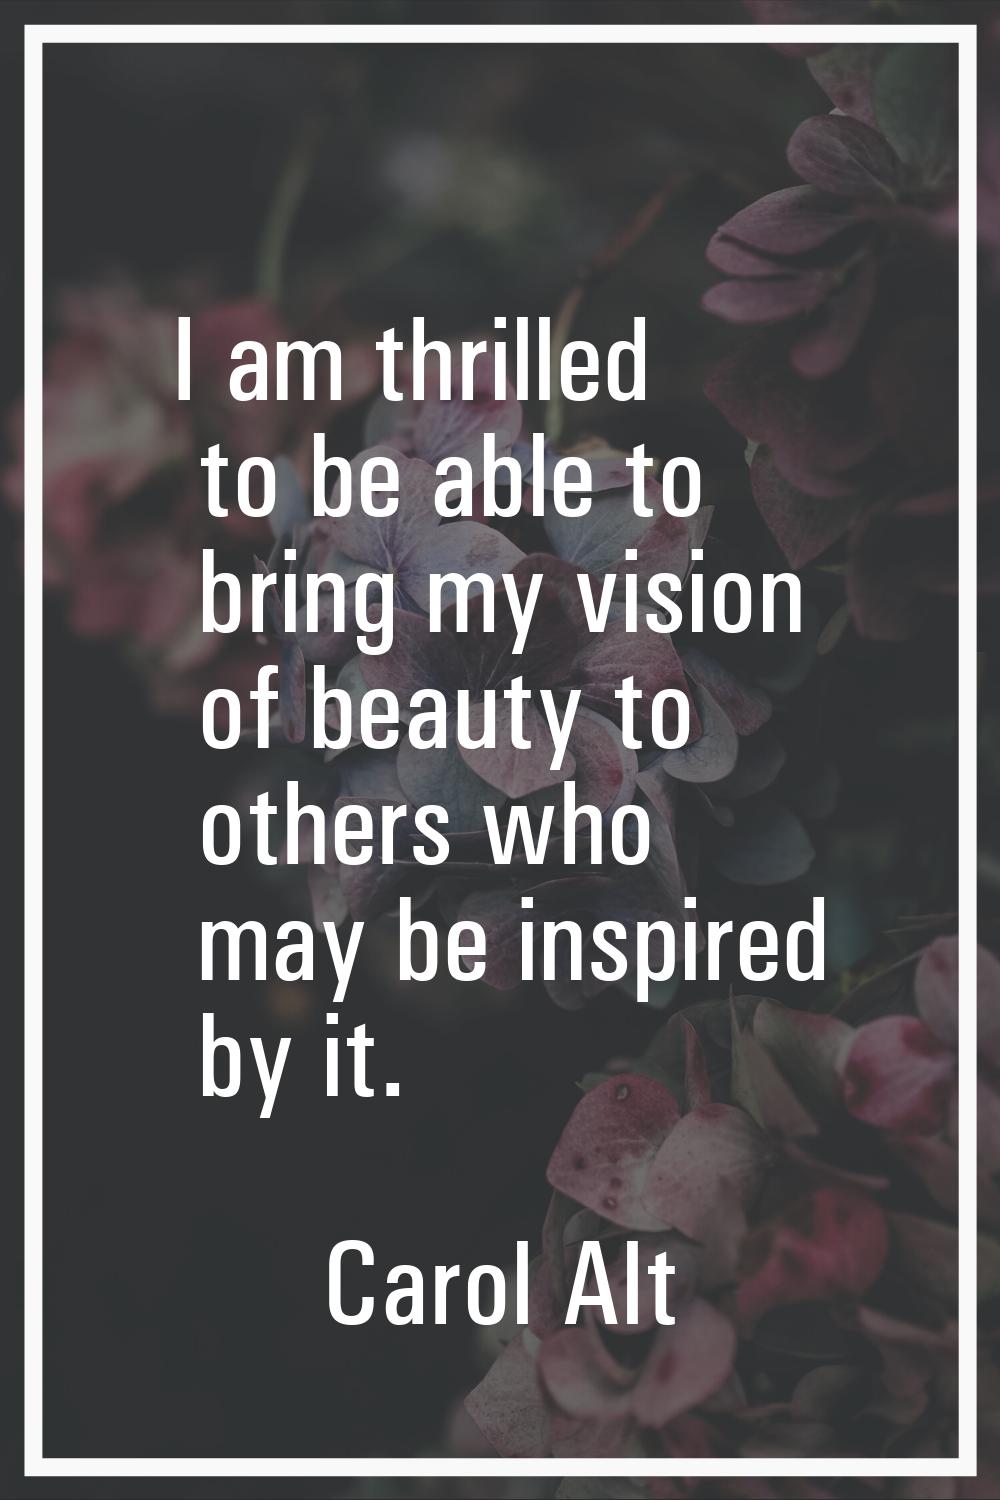 I am thrilled to be able to bring my vision of beauty to others who may be inspired by it.